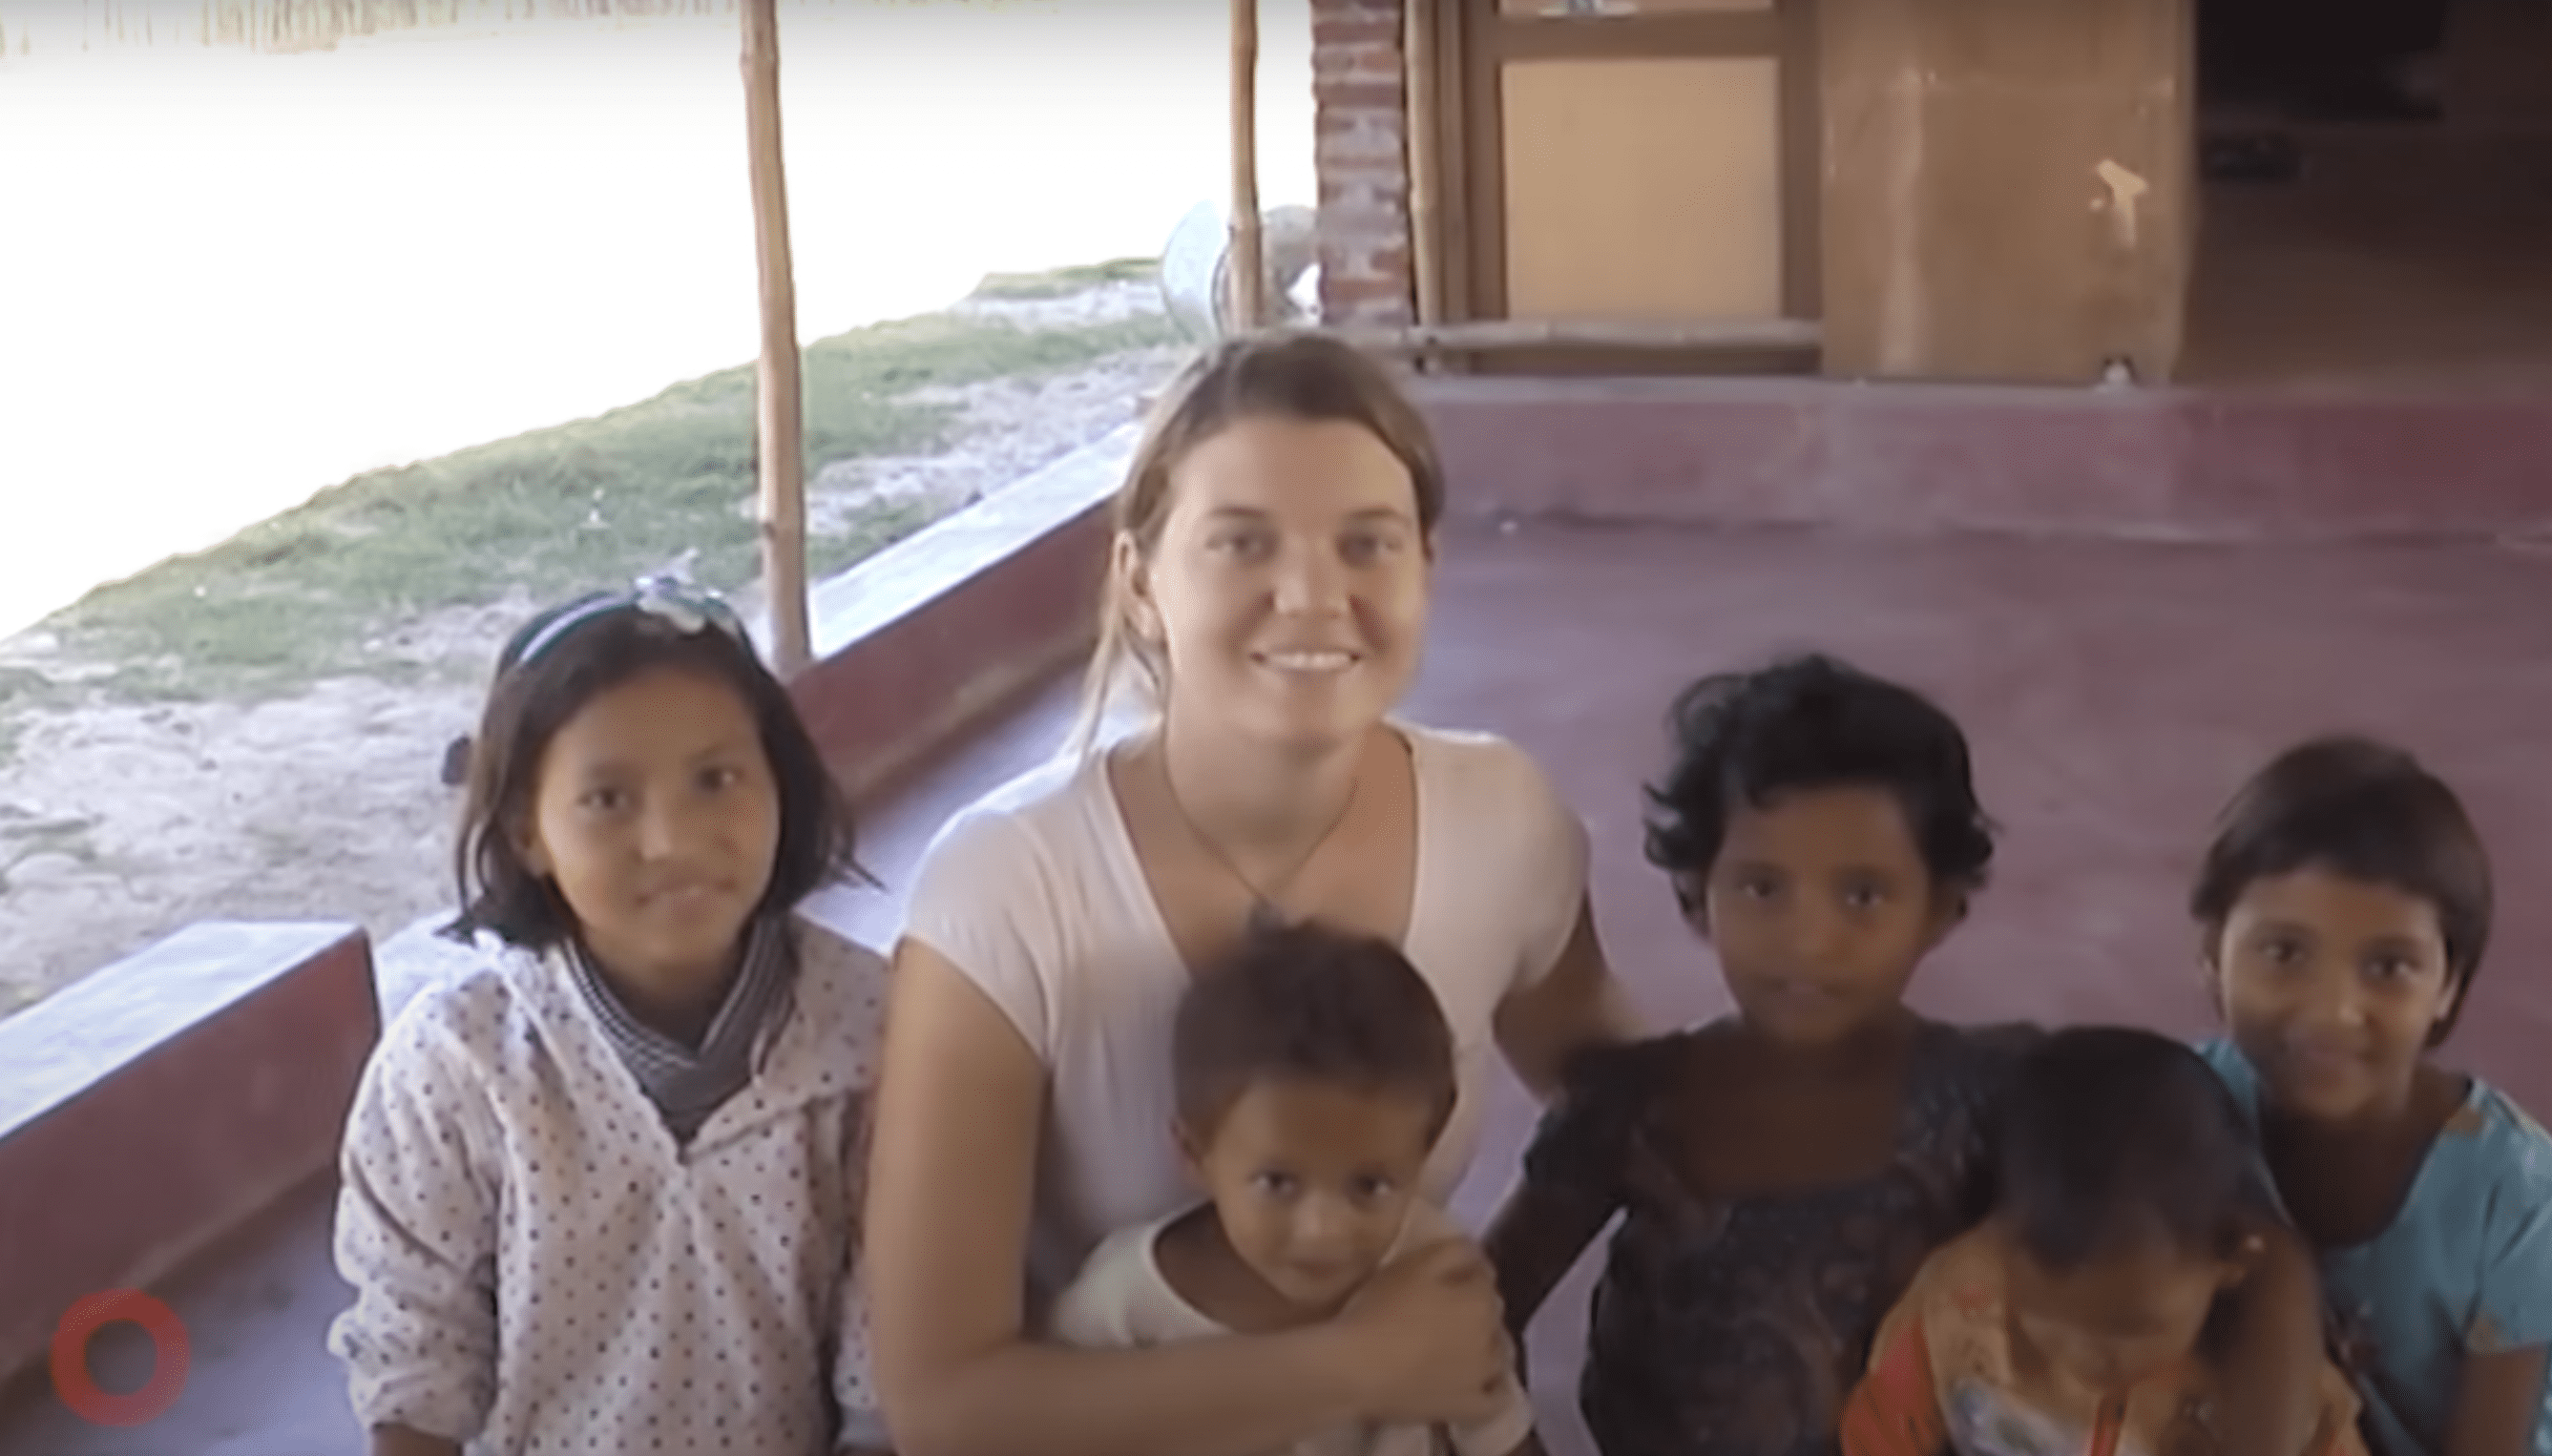 Maggie Doyne pictured with her adopted children in Nepal. | Source: YouTube.com/Global Citizen